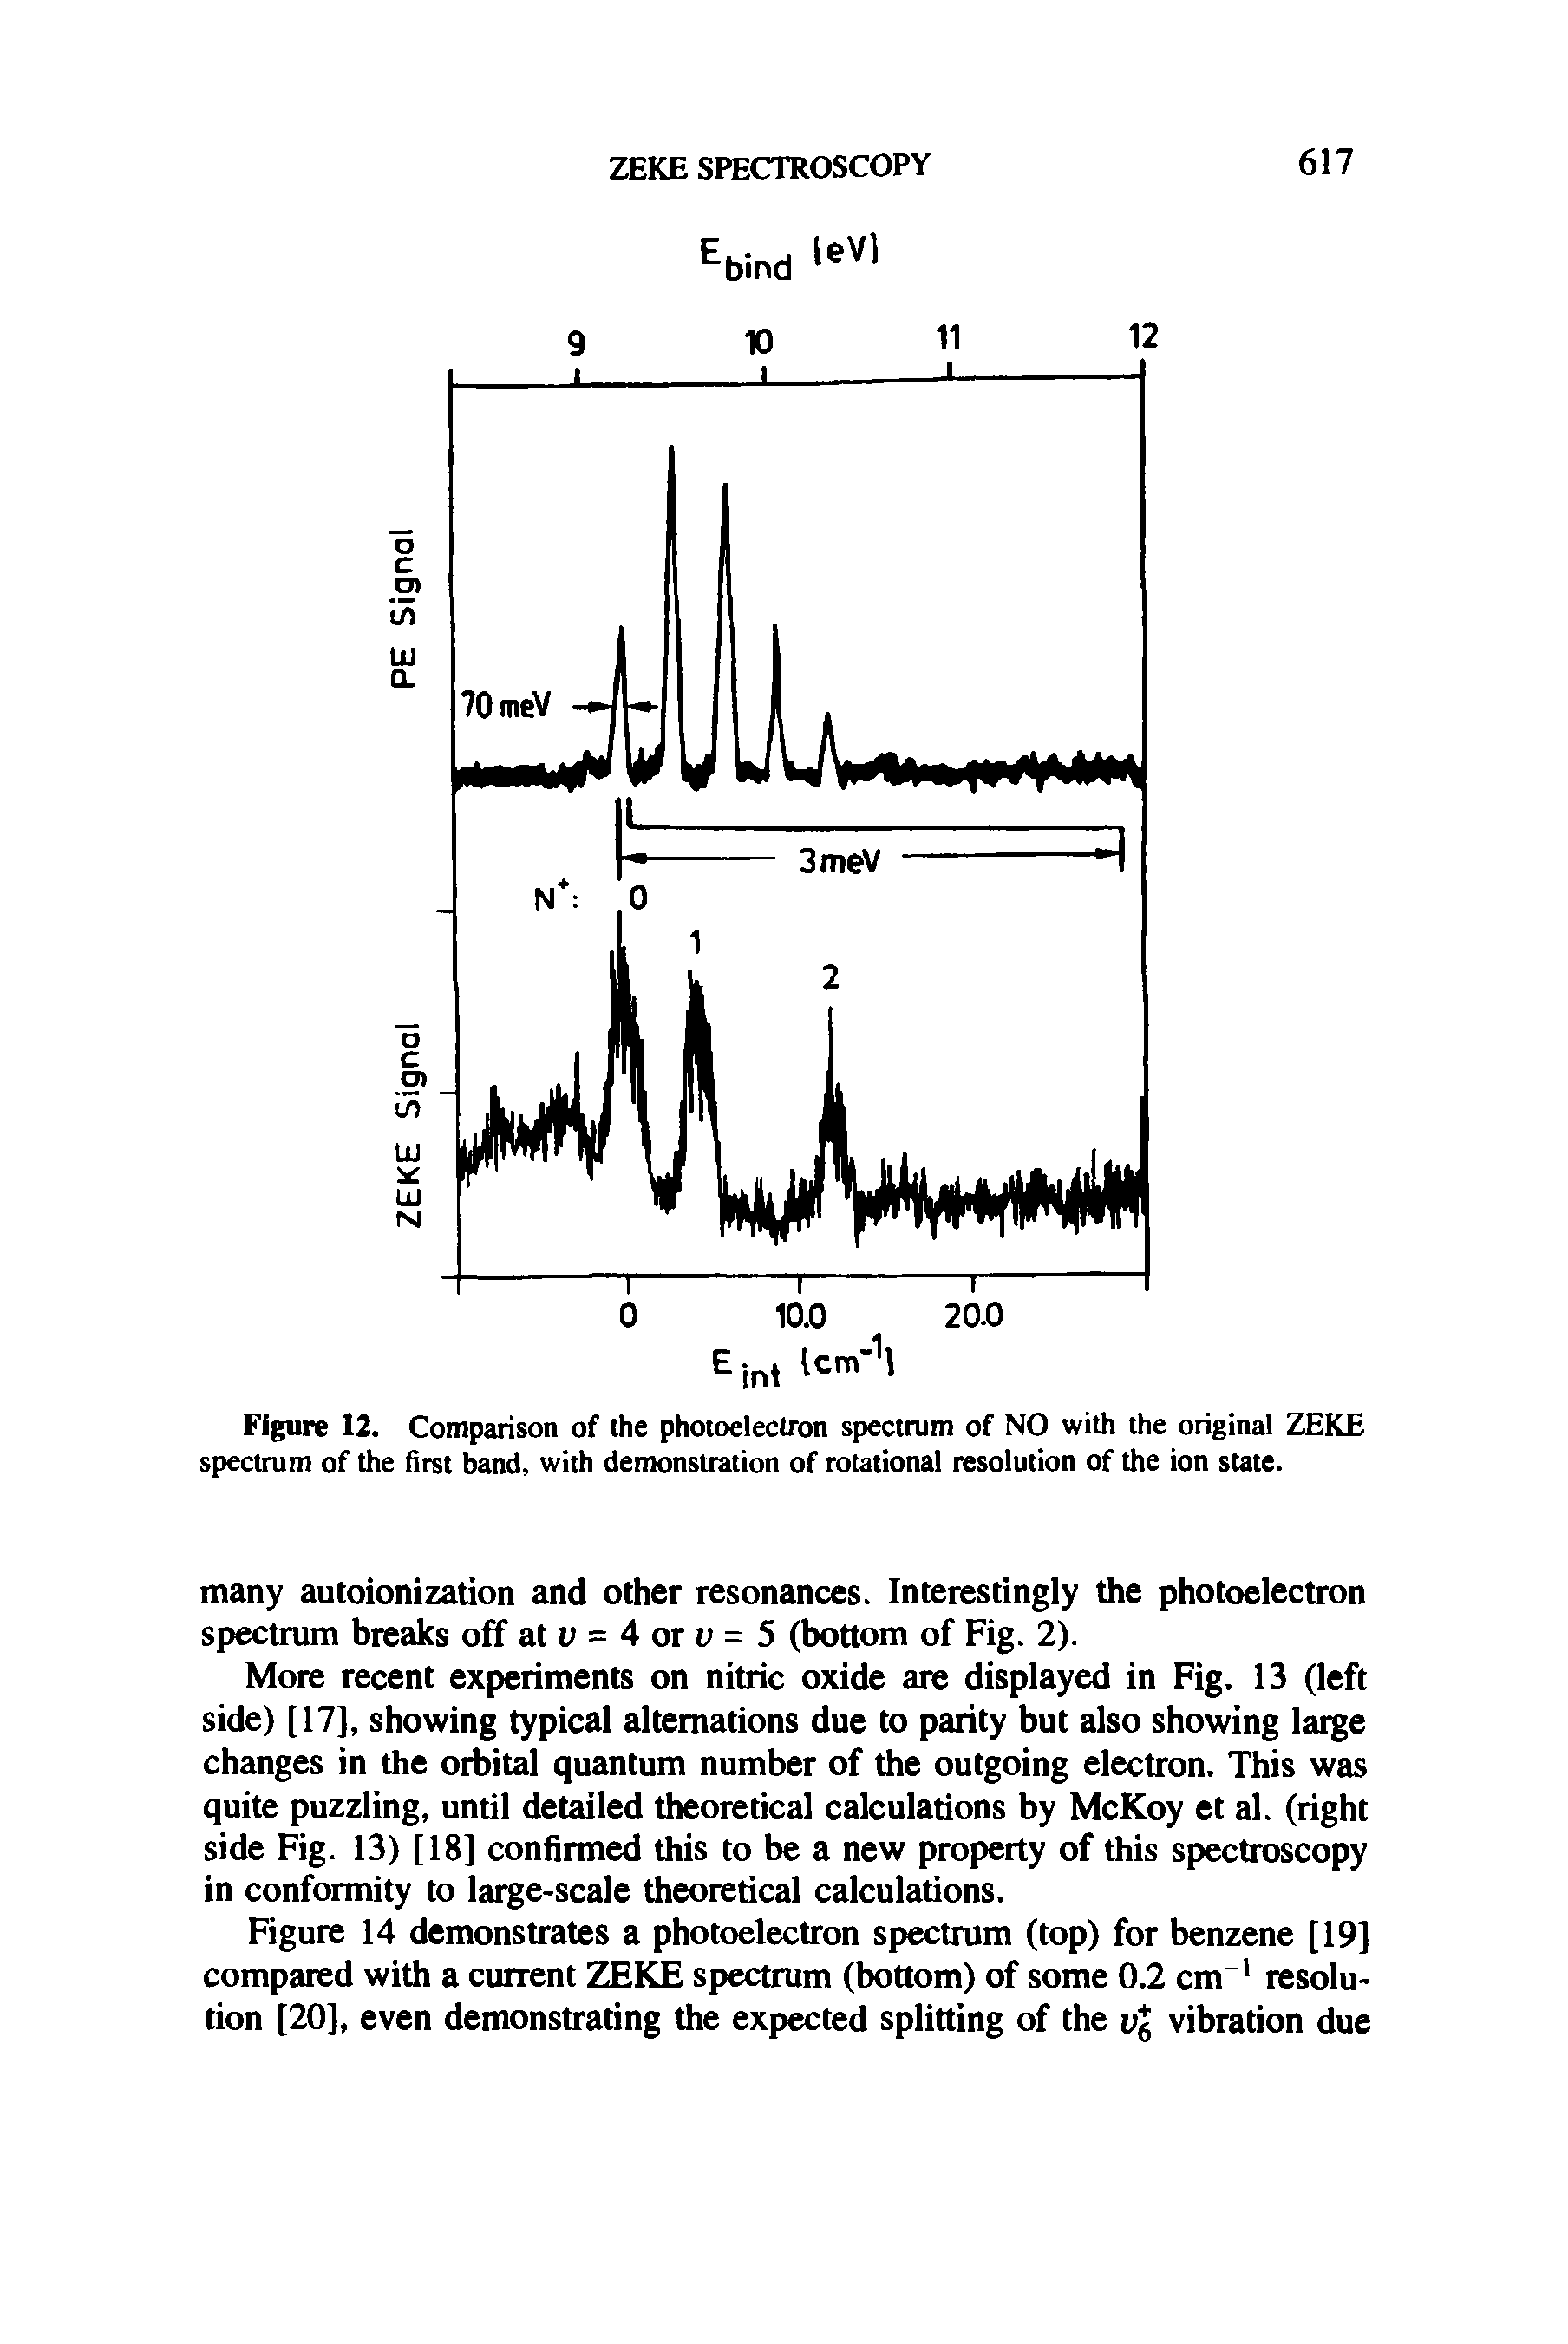 Figure 12. Comparison of the photoelectron spectrum of NO with the original ZEKE spectrum of the first band, with demonstration of rotational resolution of the ion state.